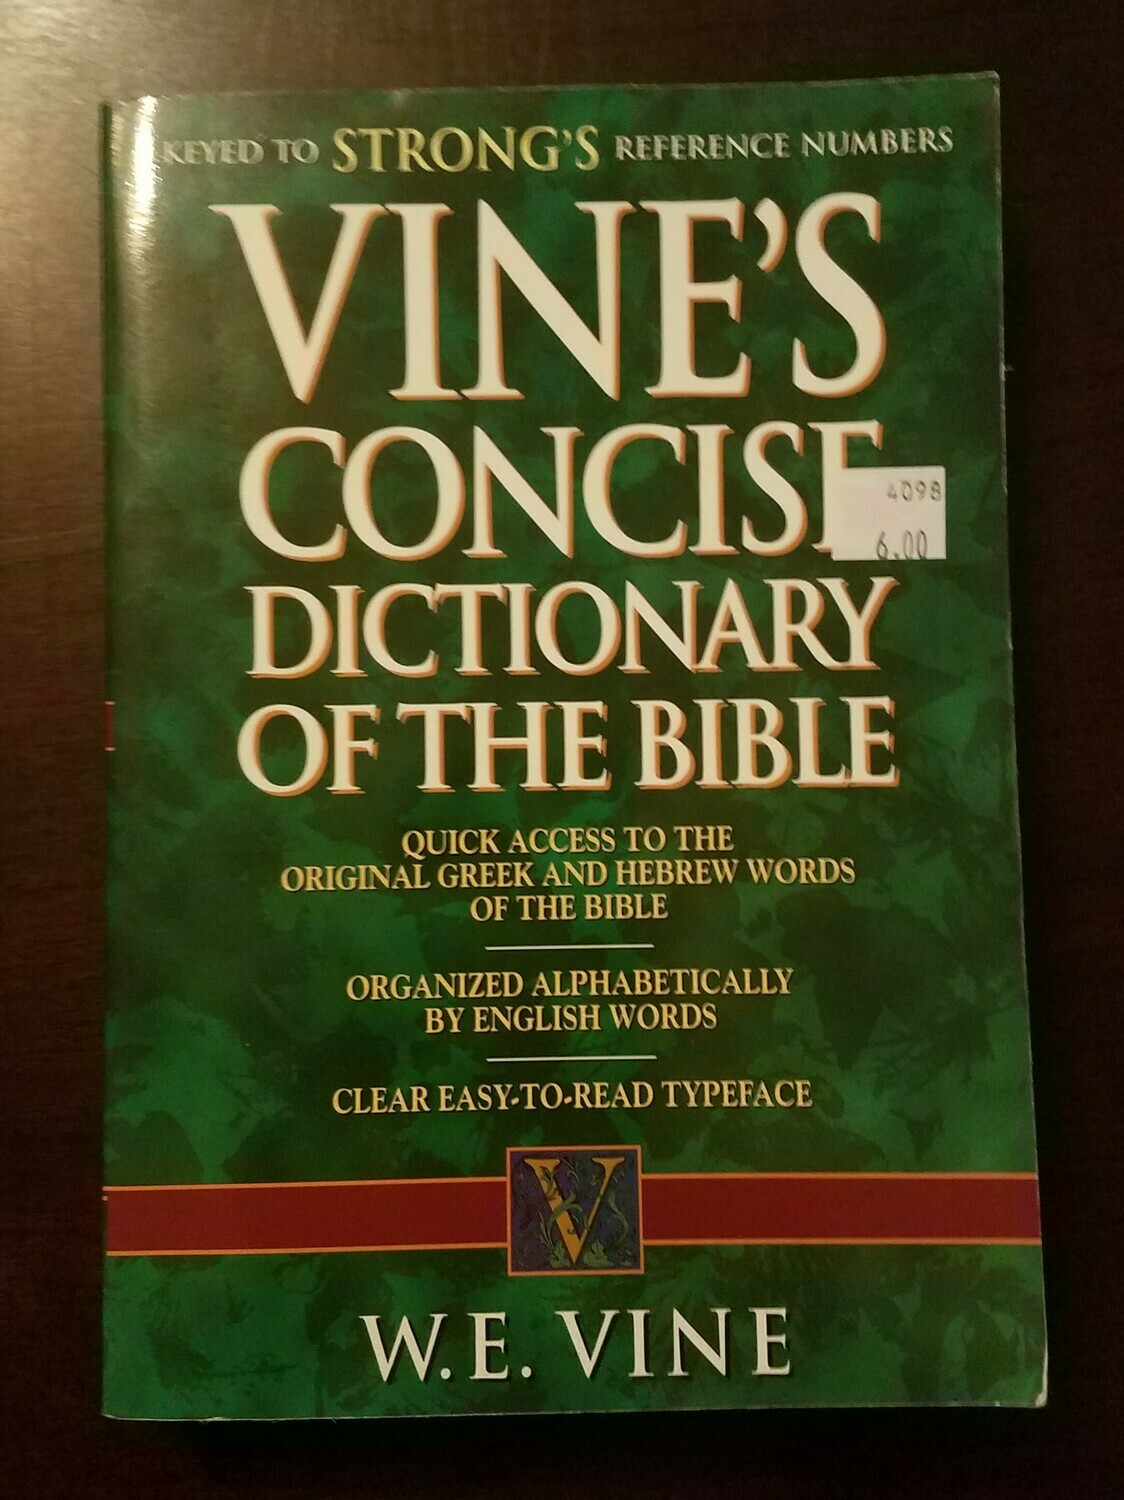 Vine's Concise Dictionary of the Bible by W.E. Vine